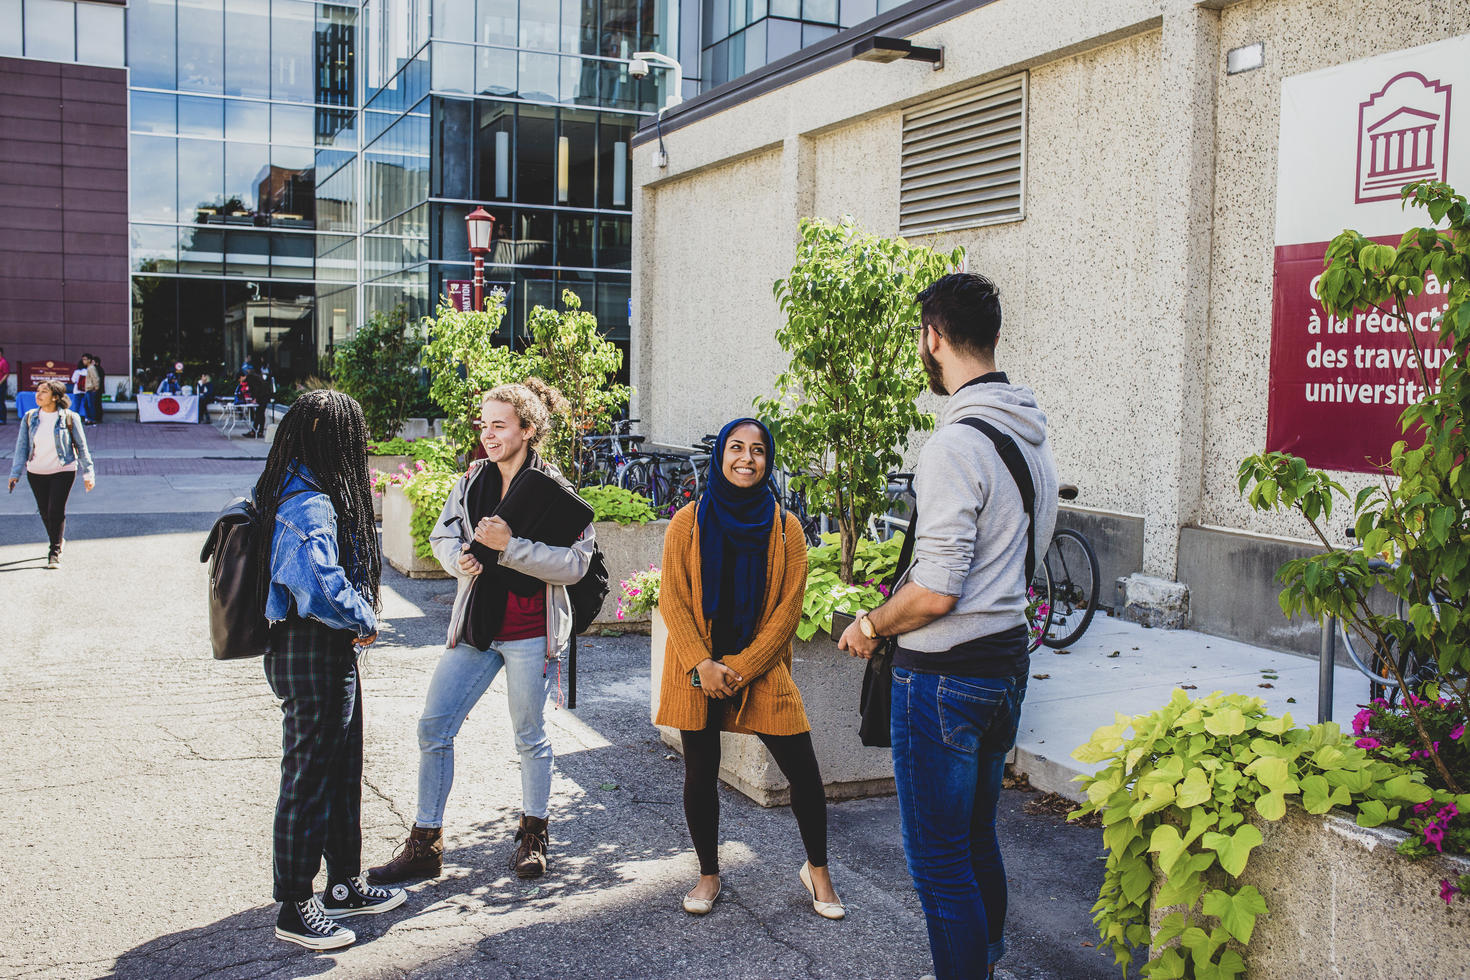 Group of four students having a conversation outdoors on campus